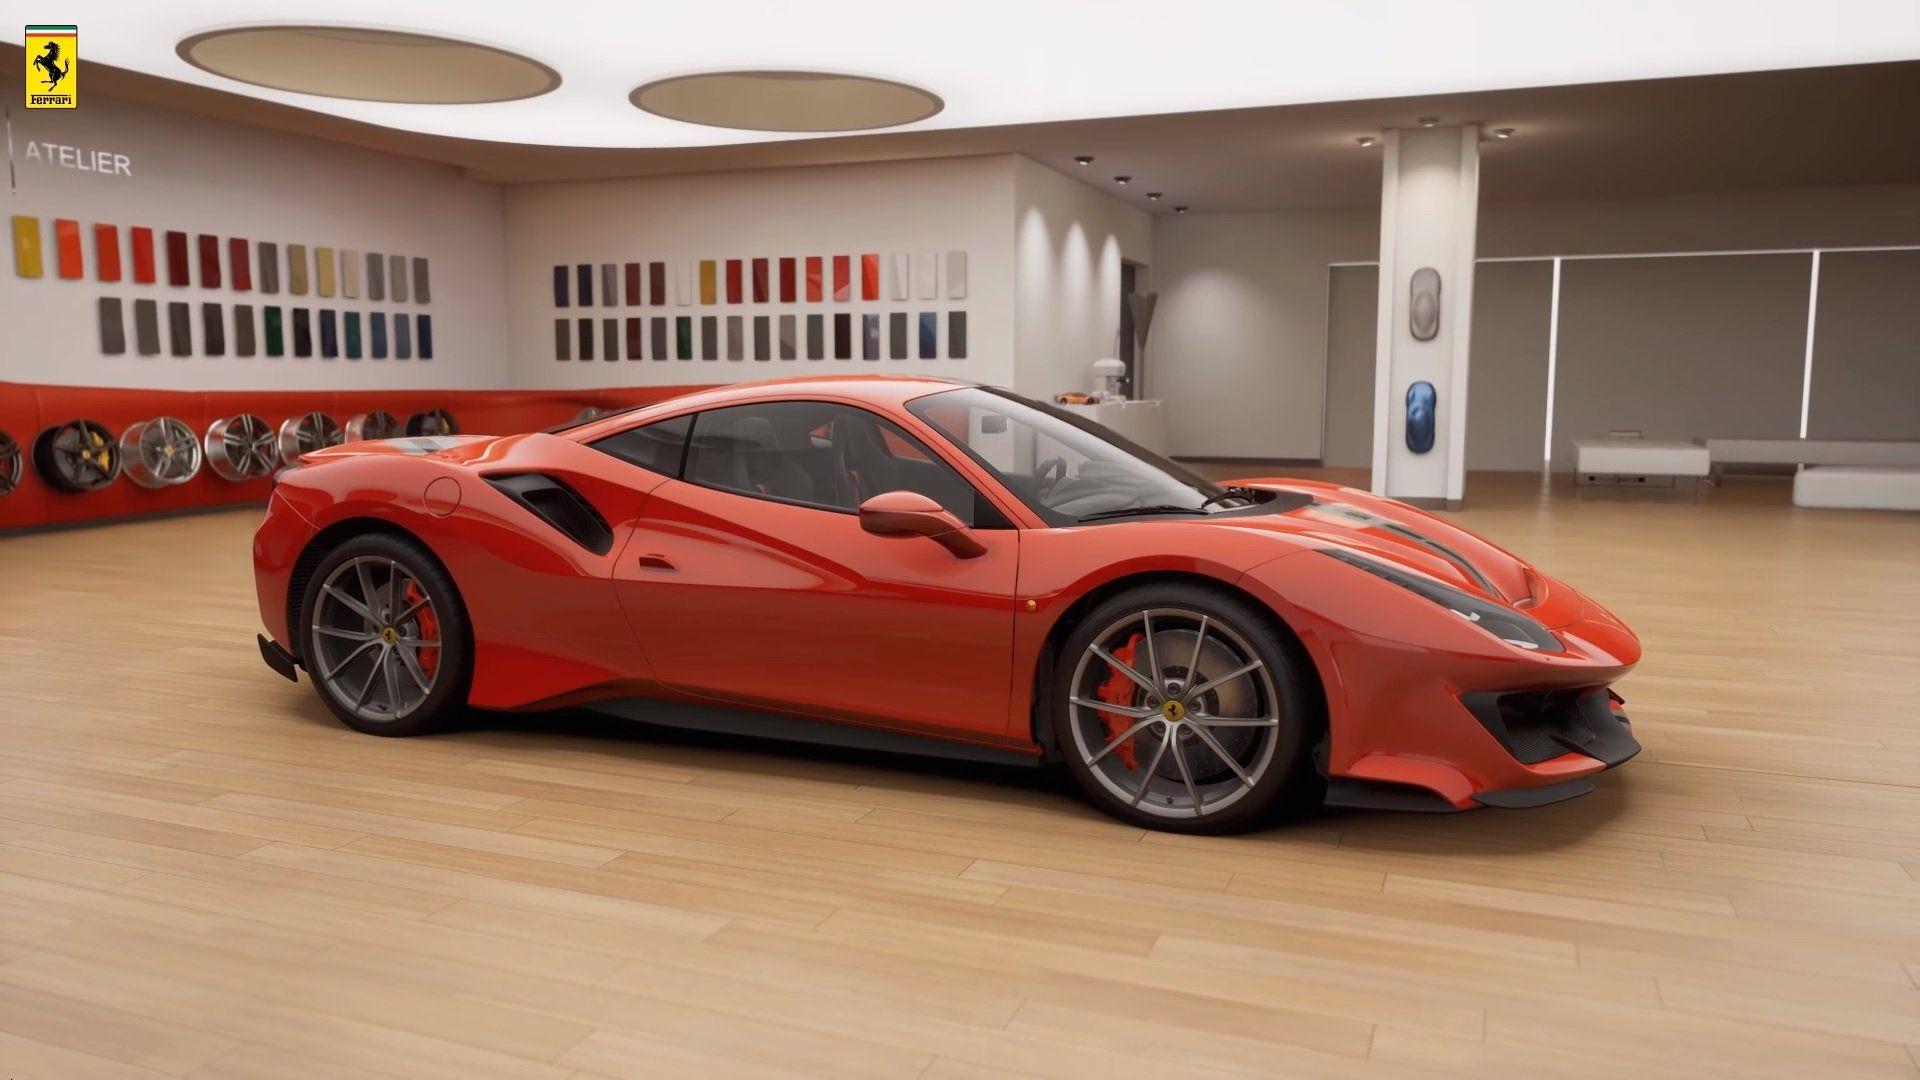 The Ferrari 488 Pista Just Leaked, And It Looks Ready To Battle